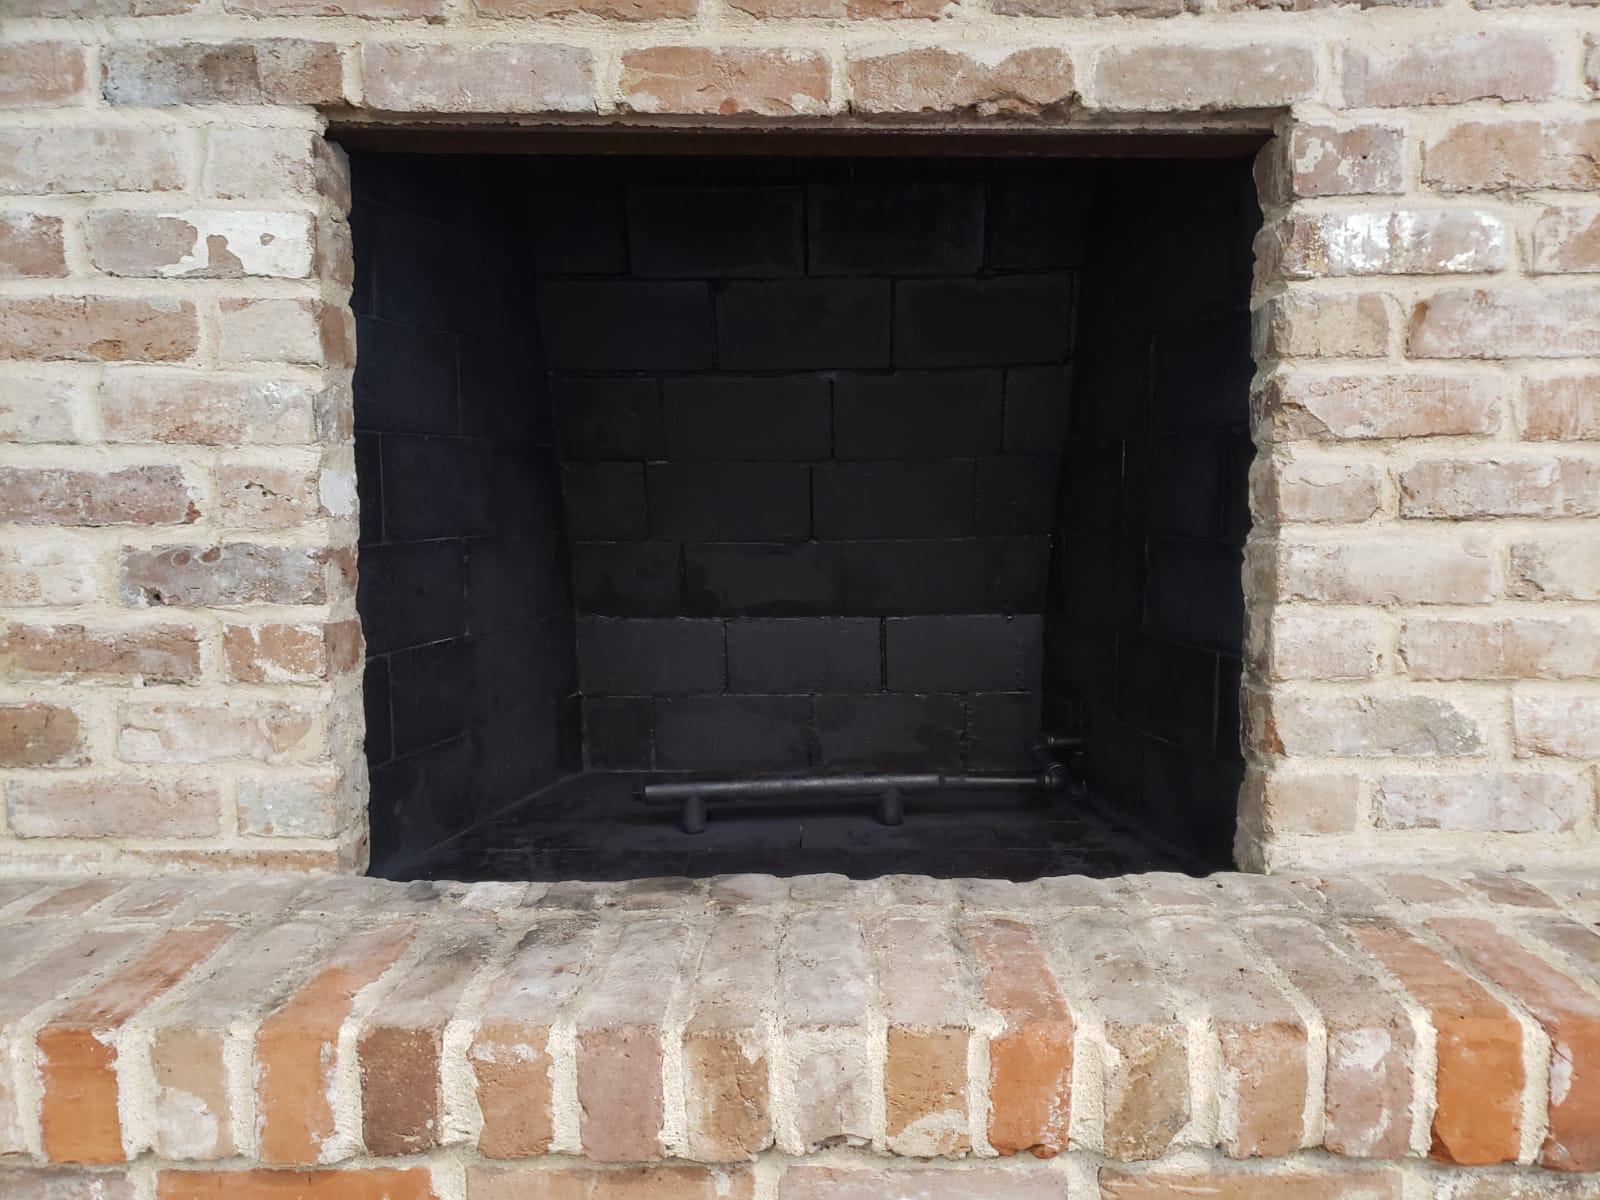 Chimeny & Fireplace Cleaning